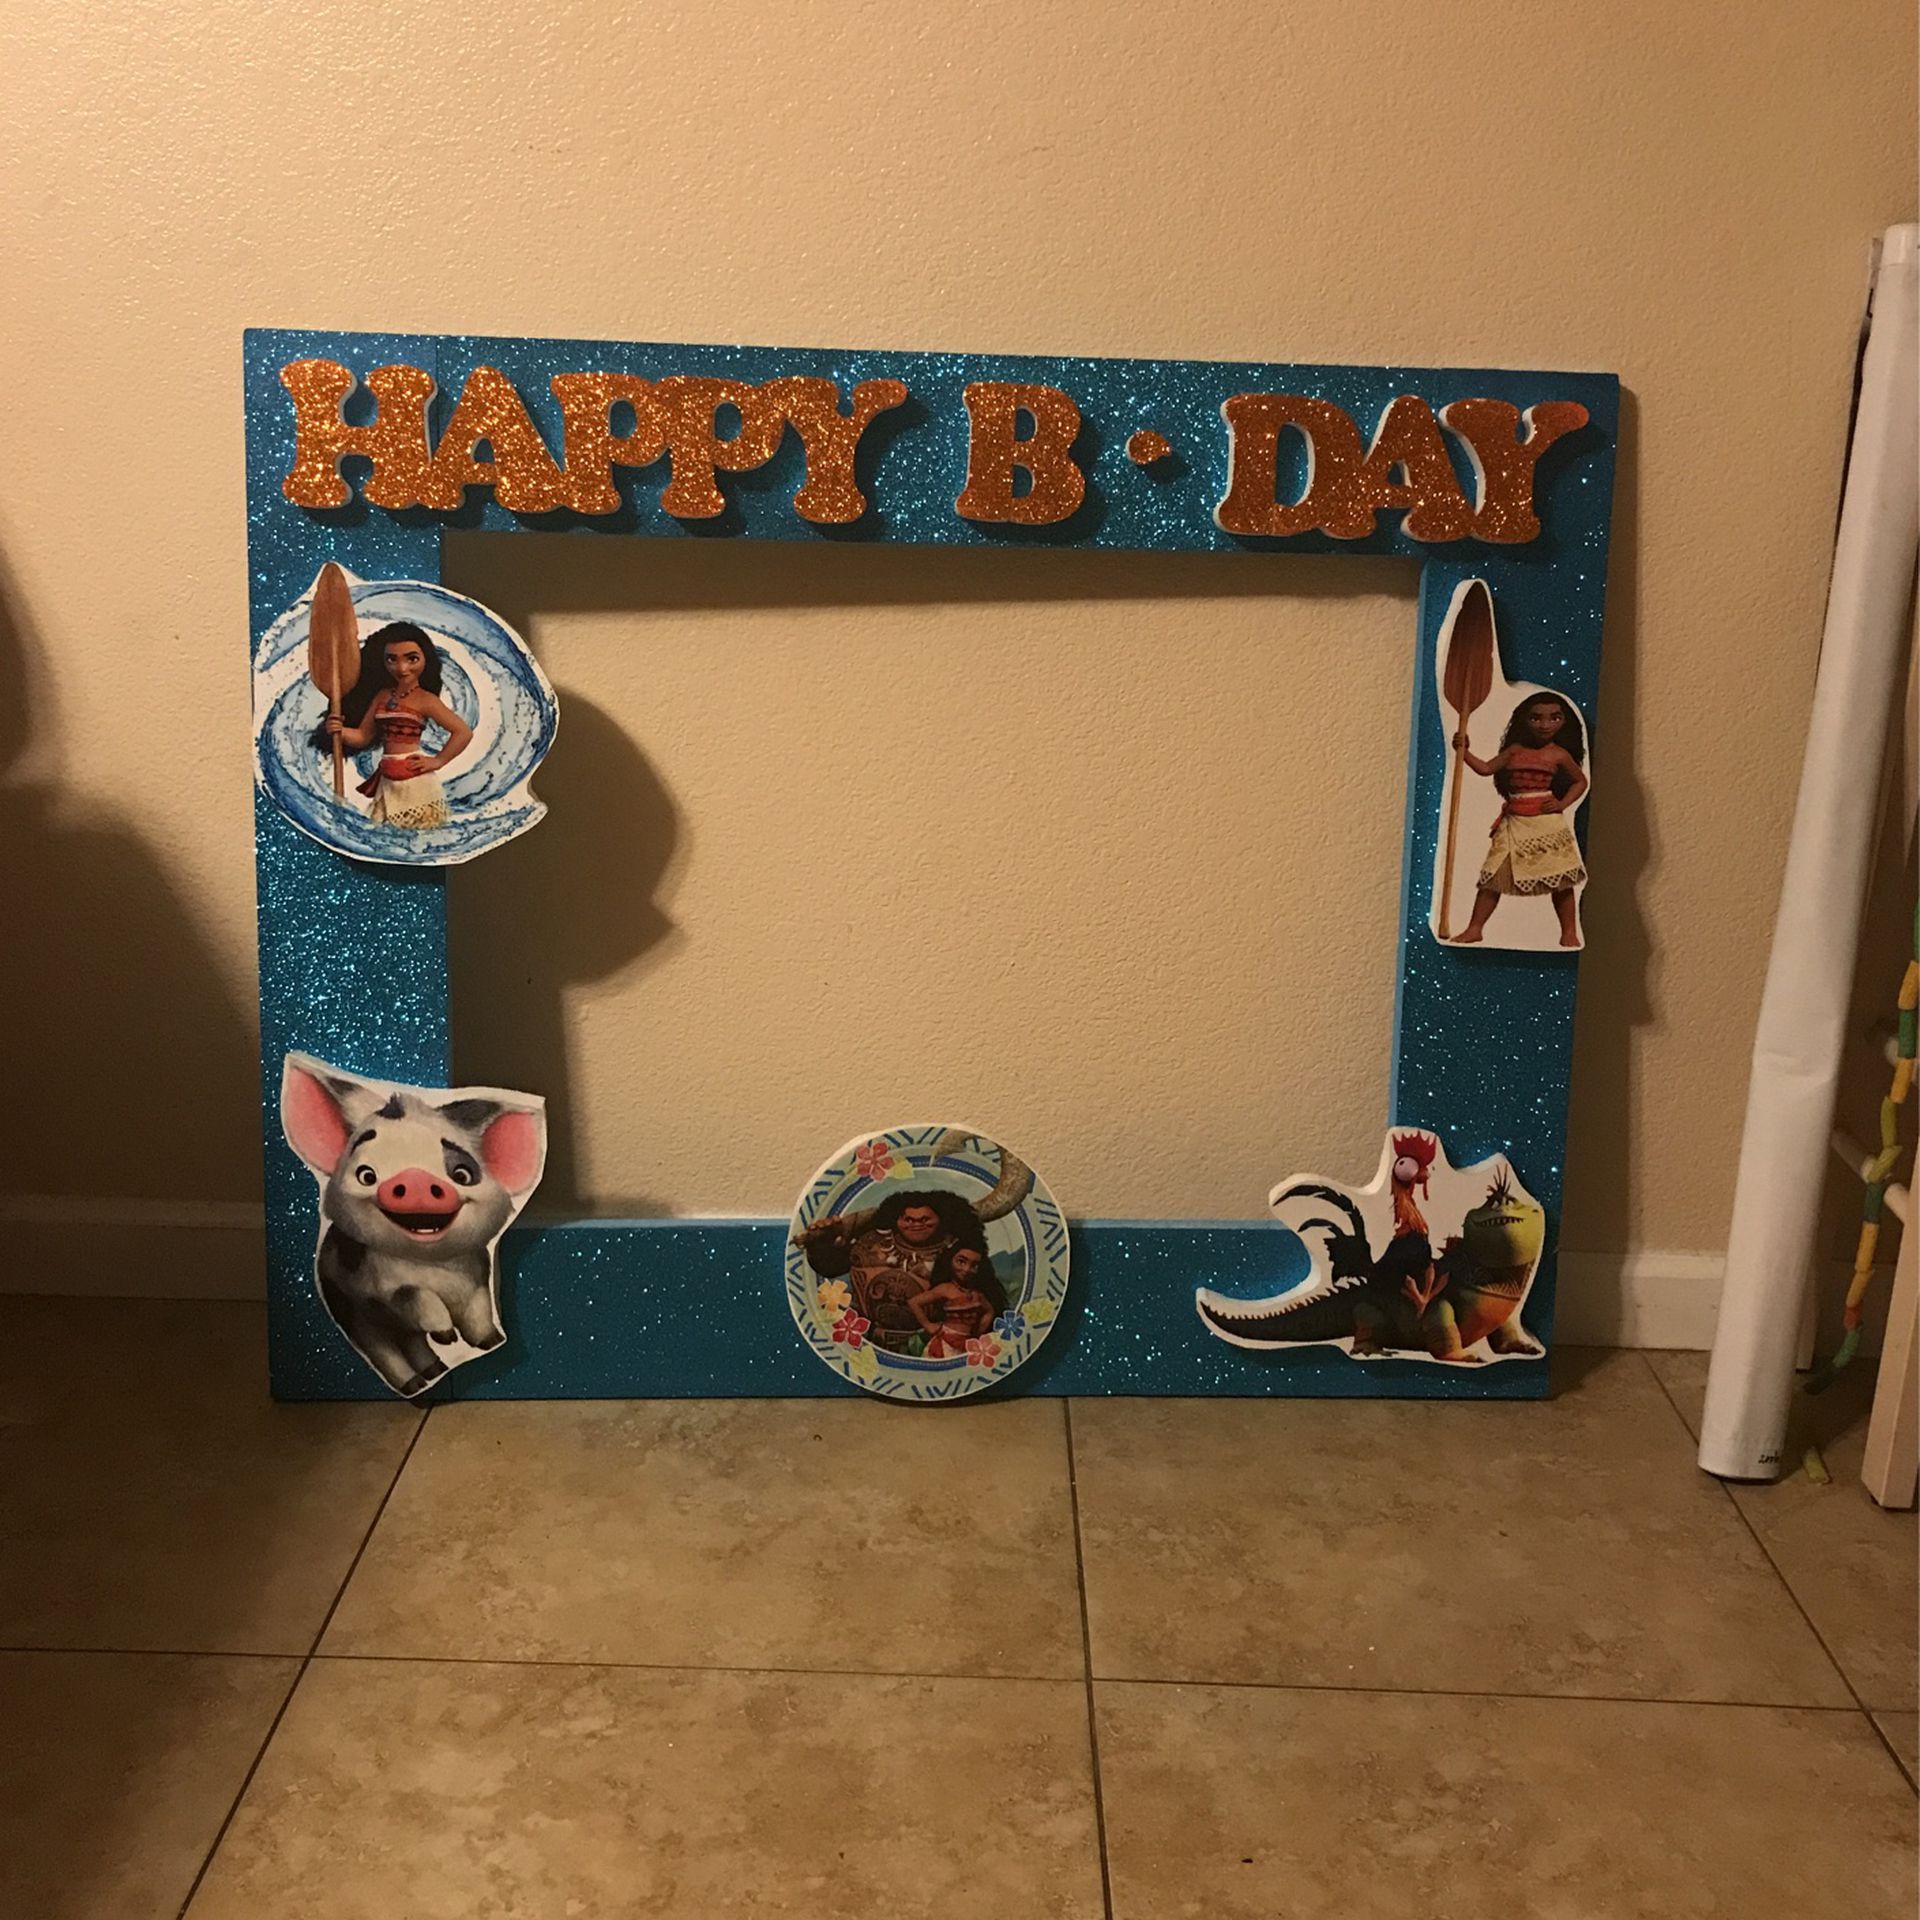 Moana Picture Frame Birthday Party 